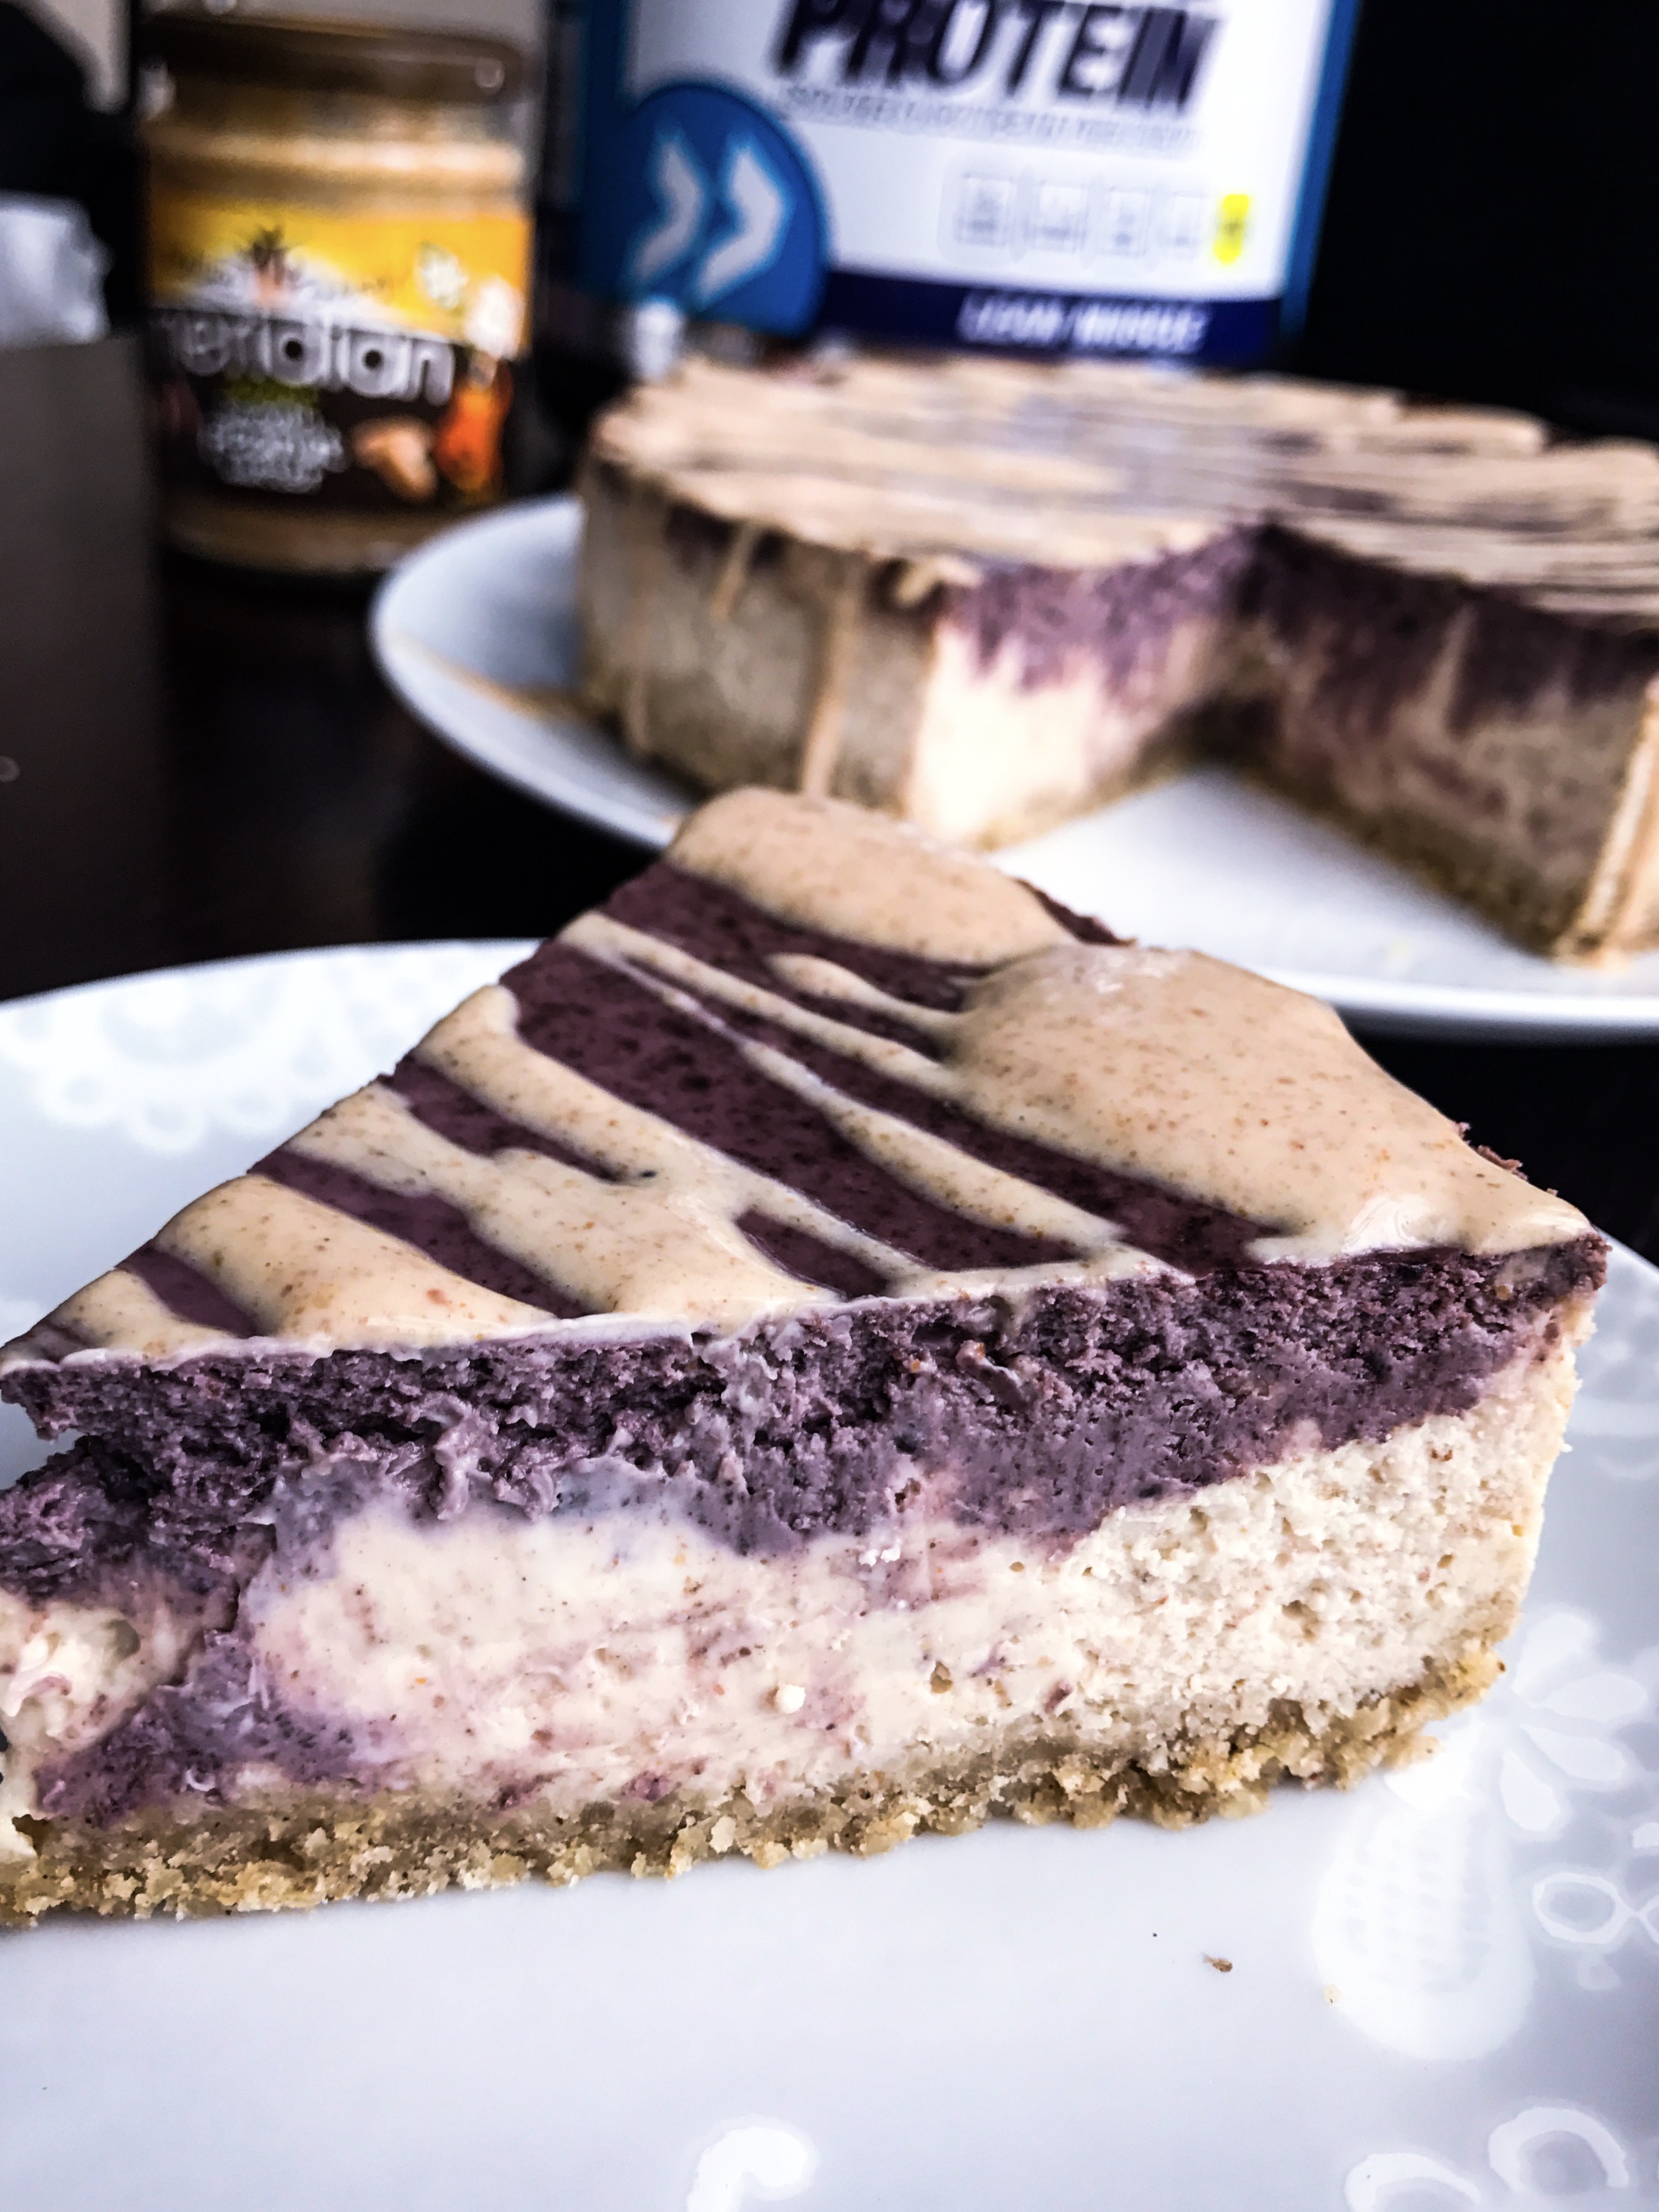 Peanut and Acai Berry Baked Cheesecake